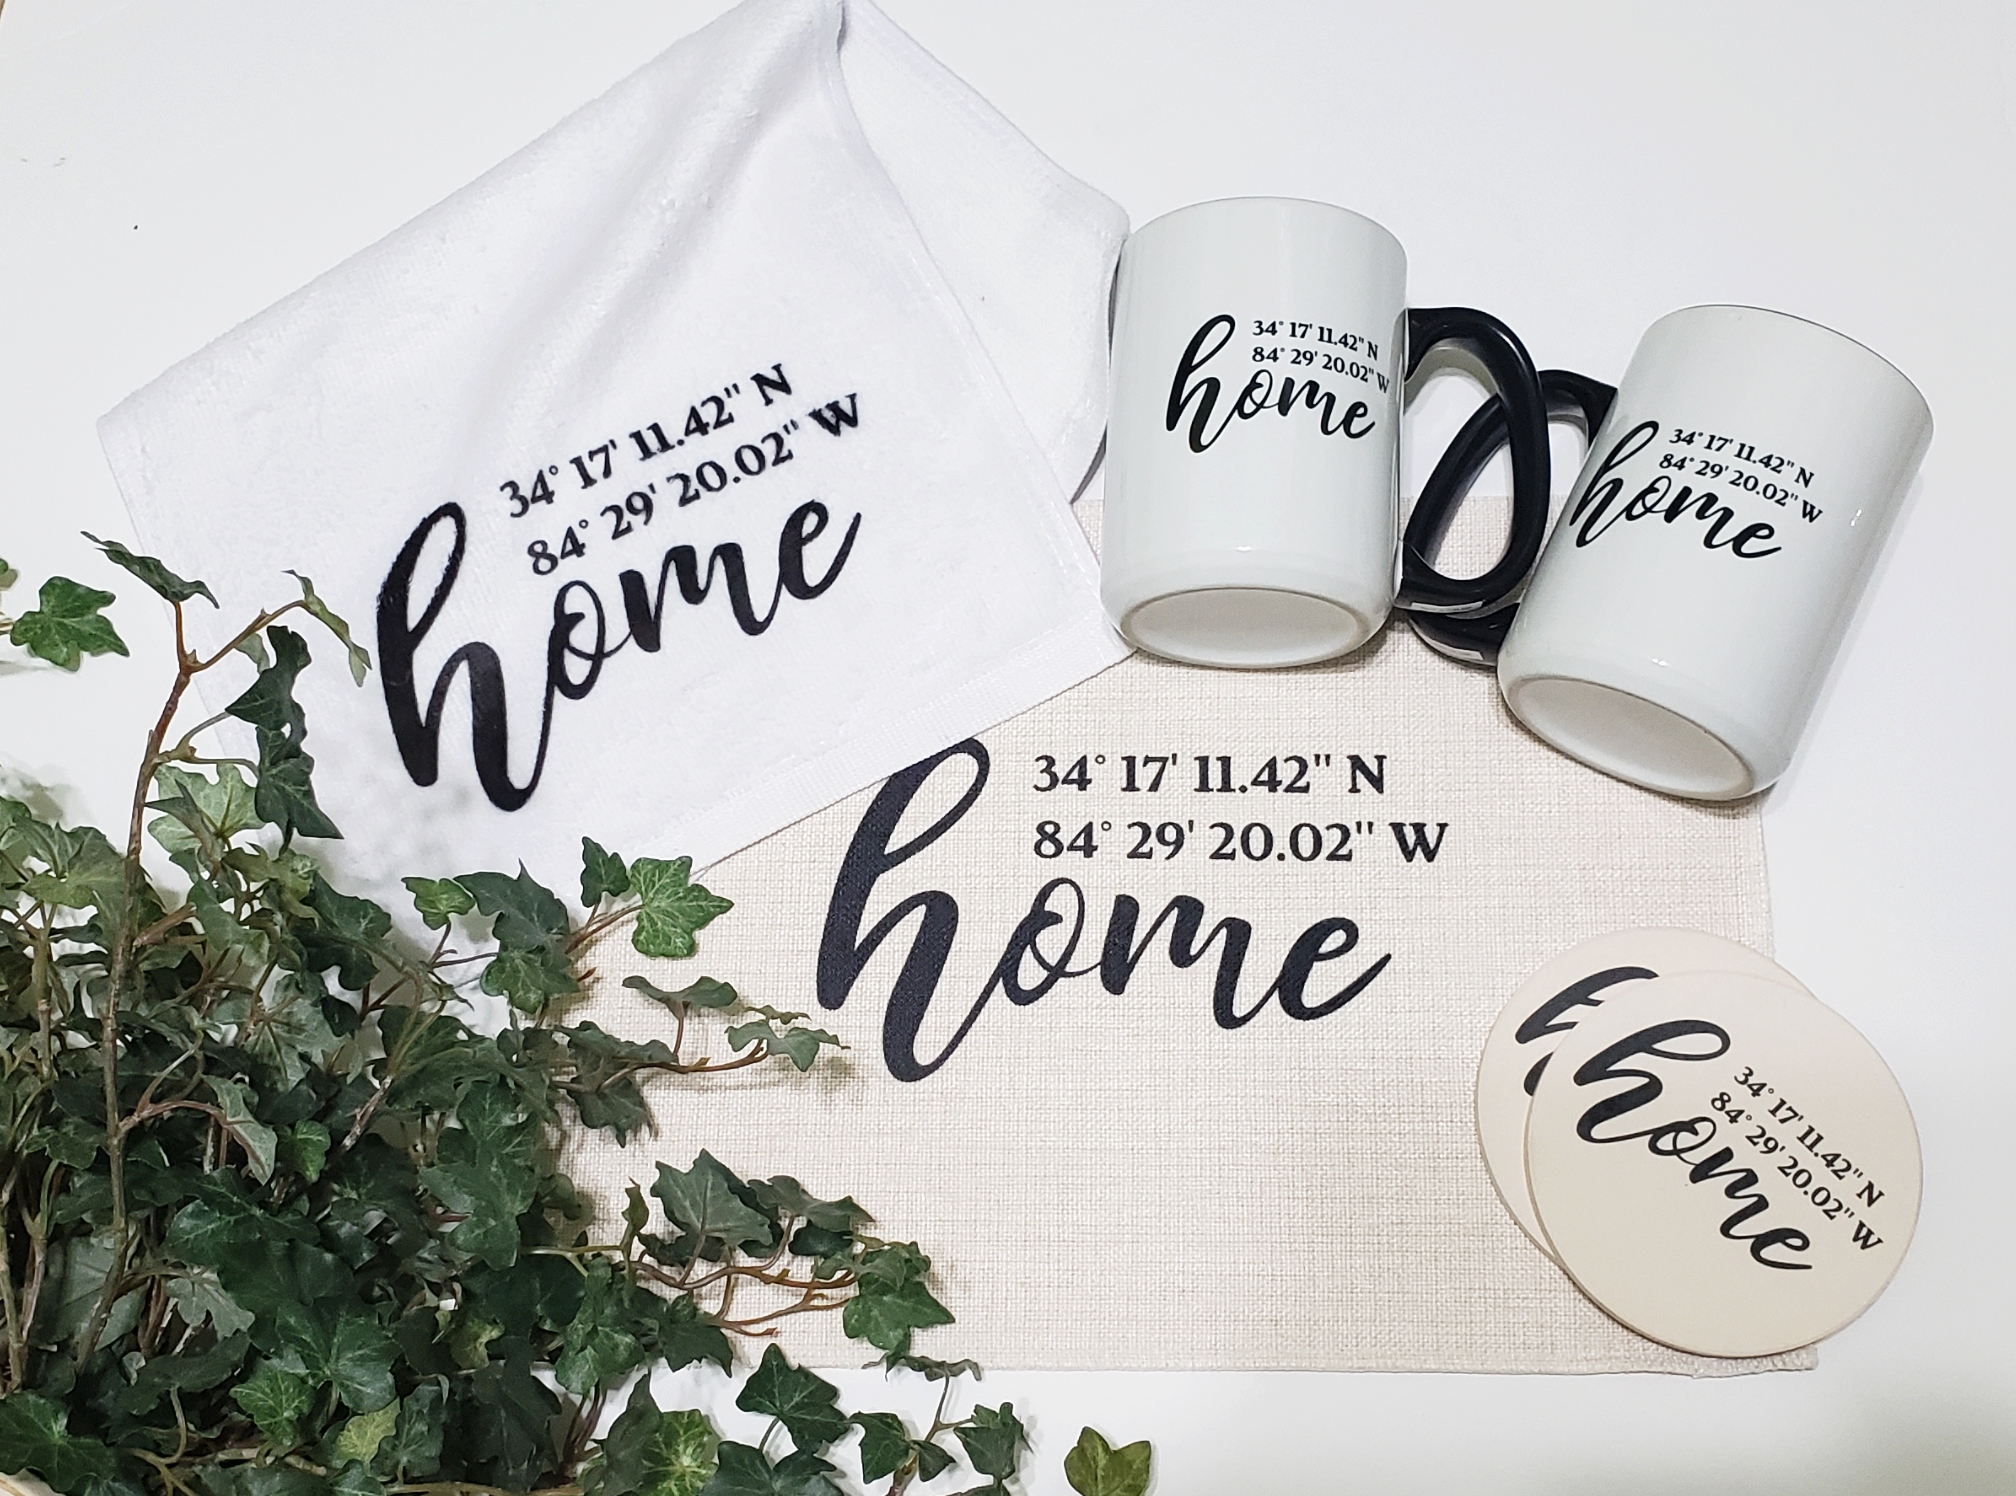 A realtor gift for her clients including a mug, linen placemat and towel.